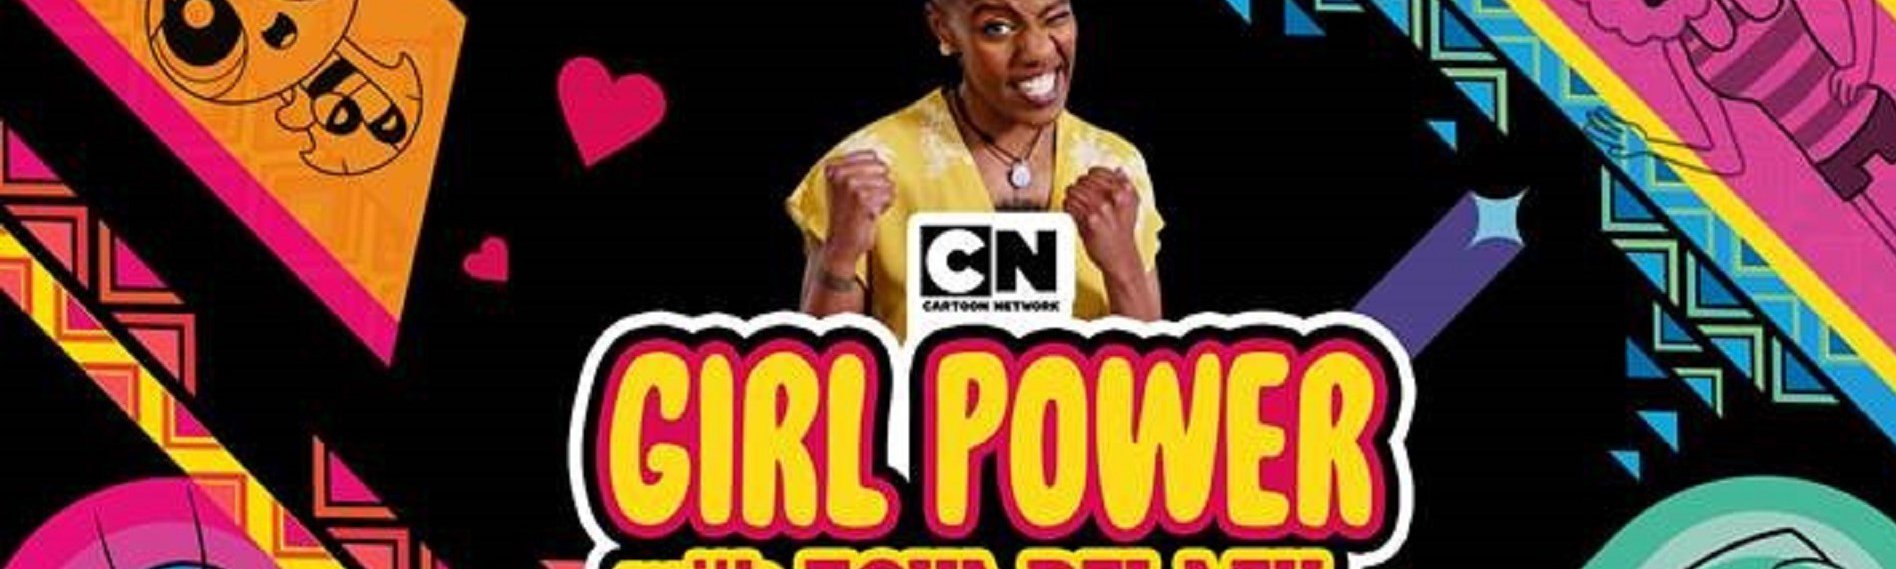 Cartoon Network Girl Power | Things to do With Kids | Shows